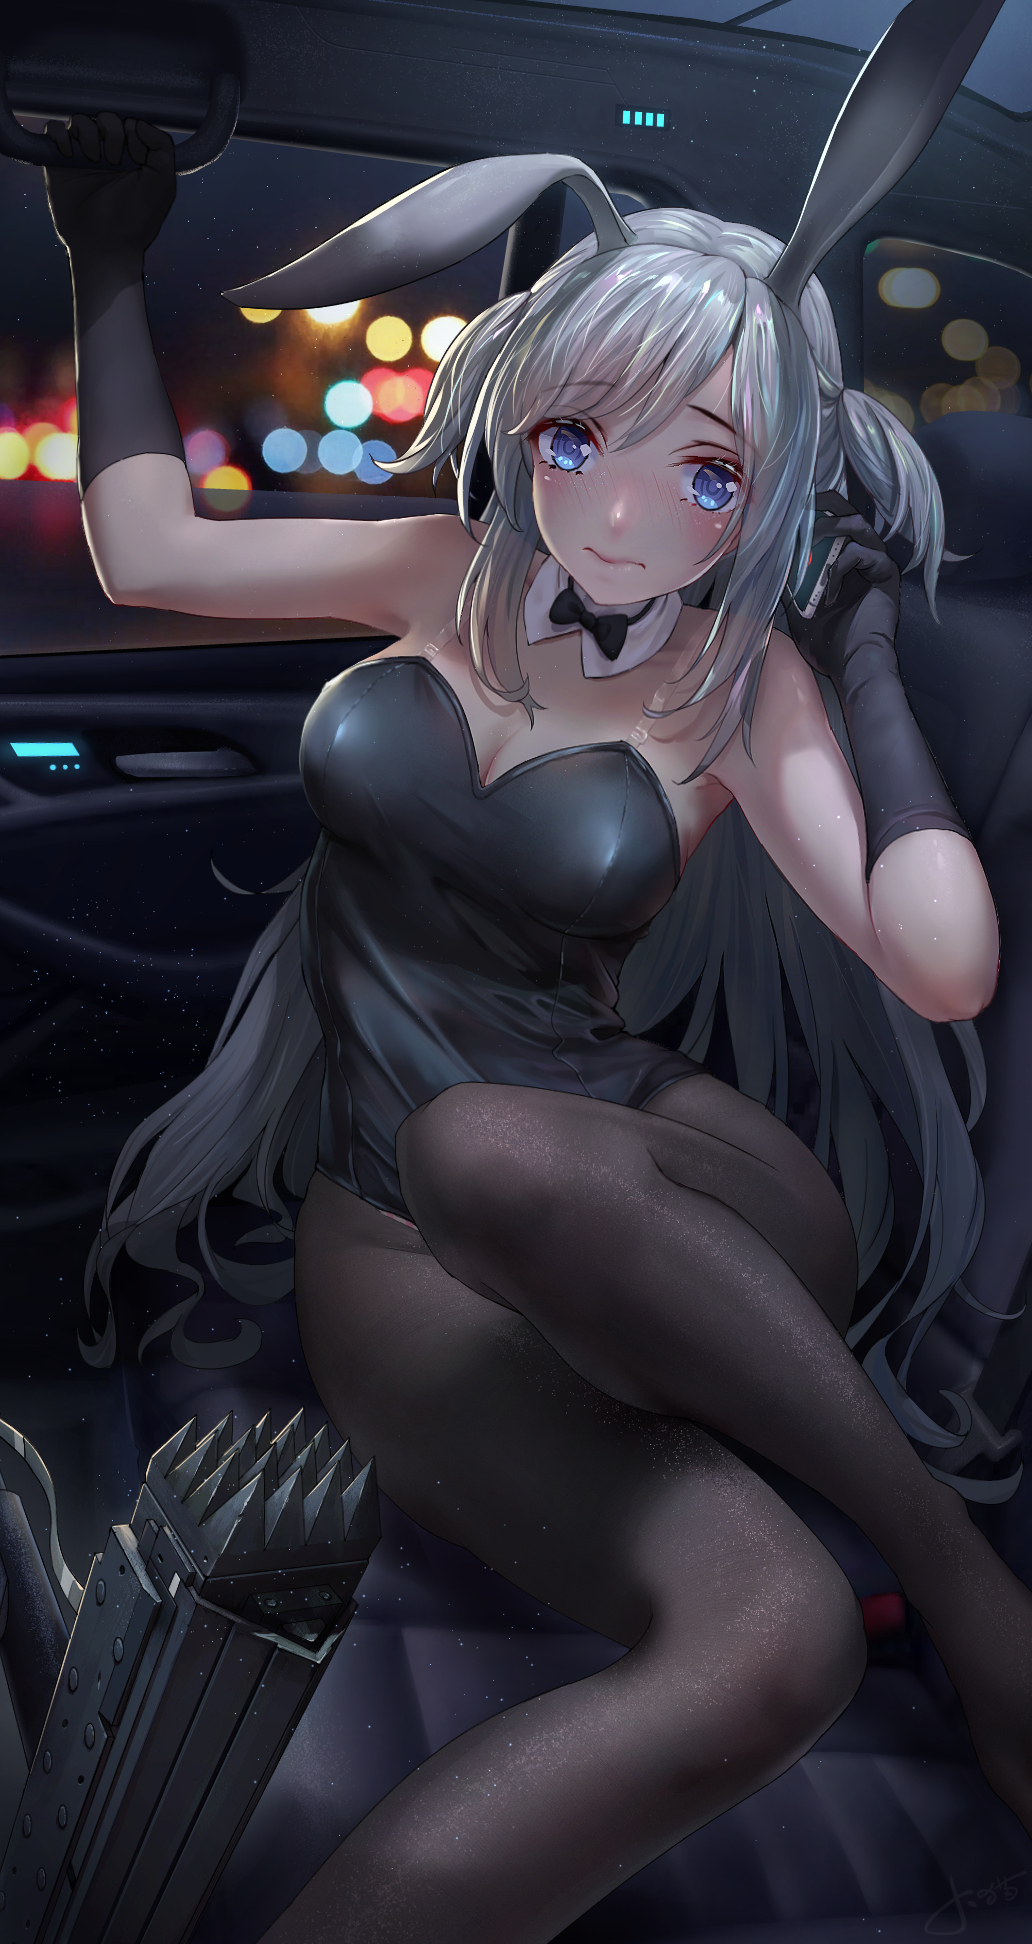 Anime 1032x1944 Jay Xu anime girls Arknights anime bunny ears blue eyes legs legs together long hair women with cars car vehicle car interior embarrassed pantyhose gloves